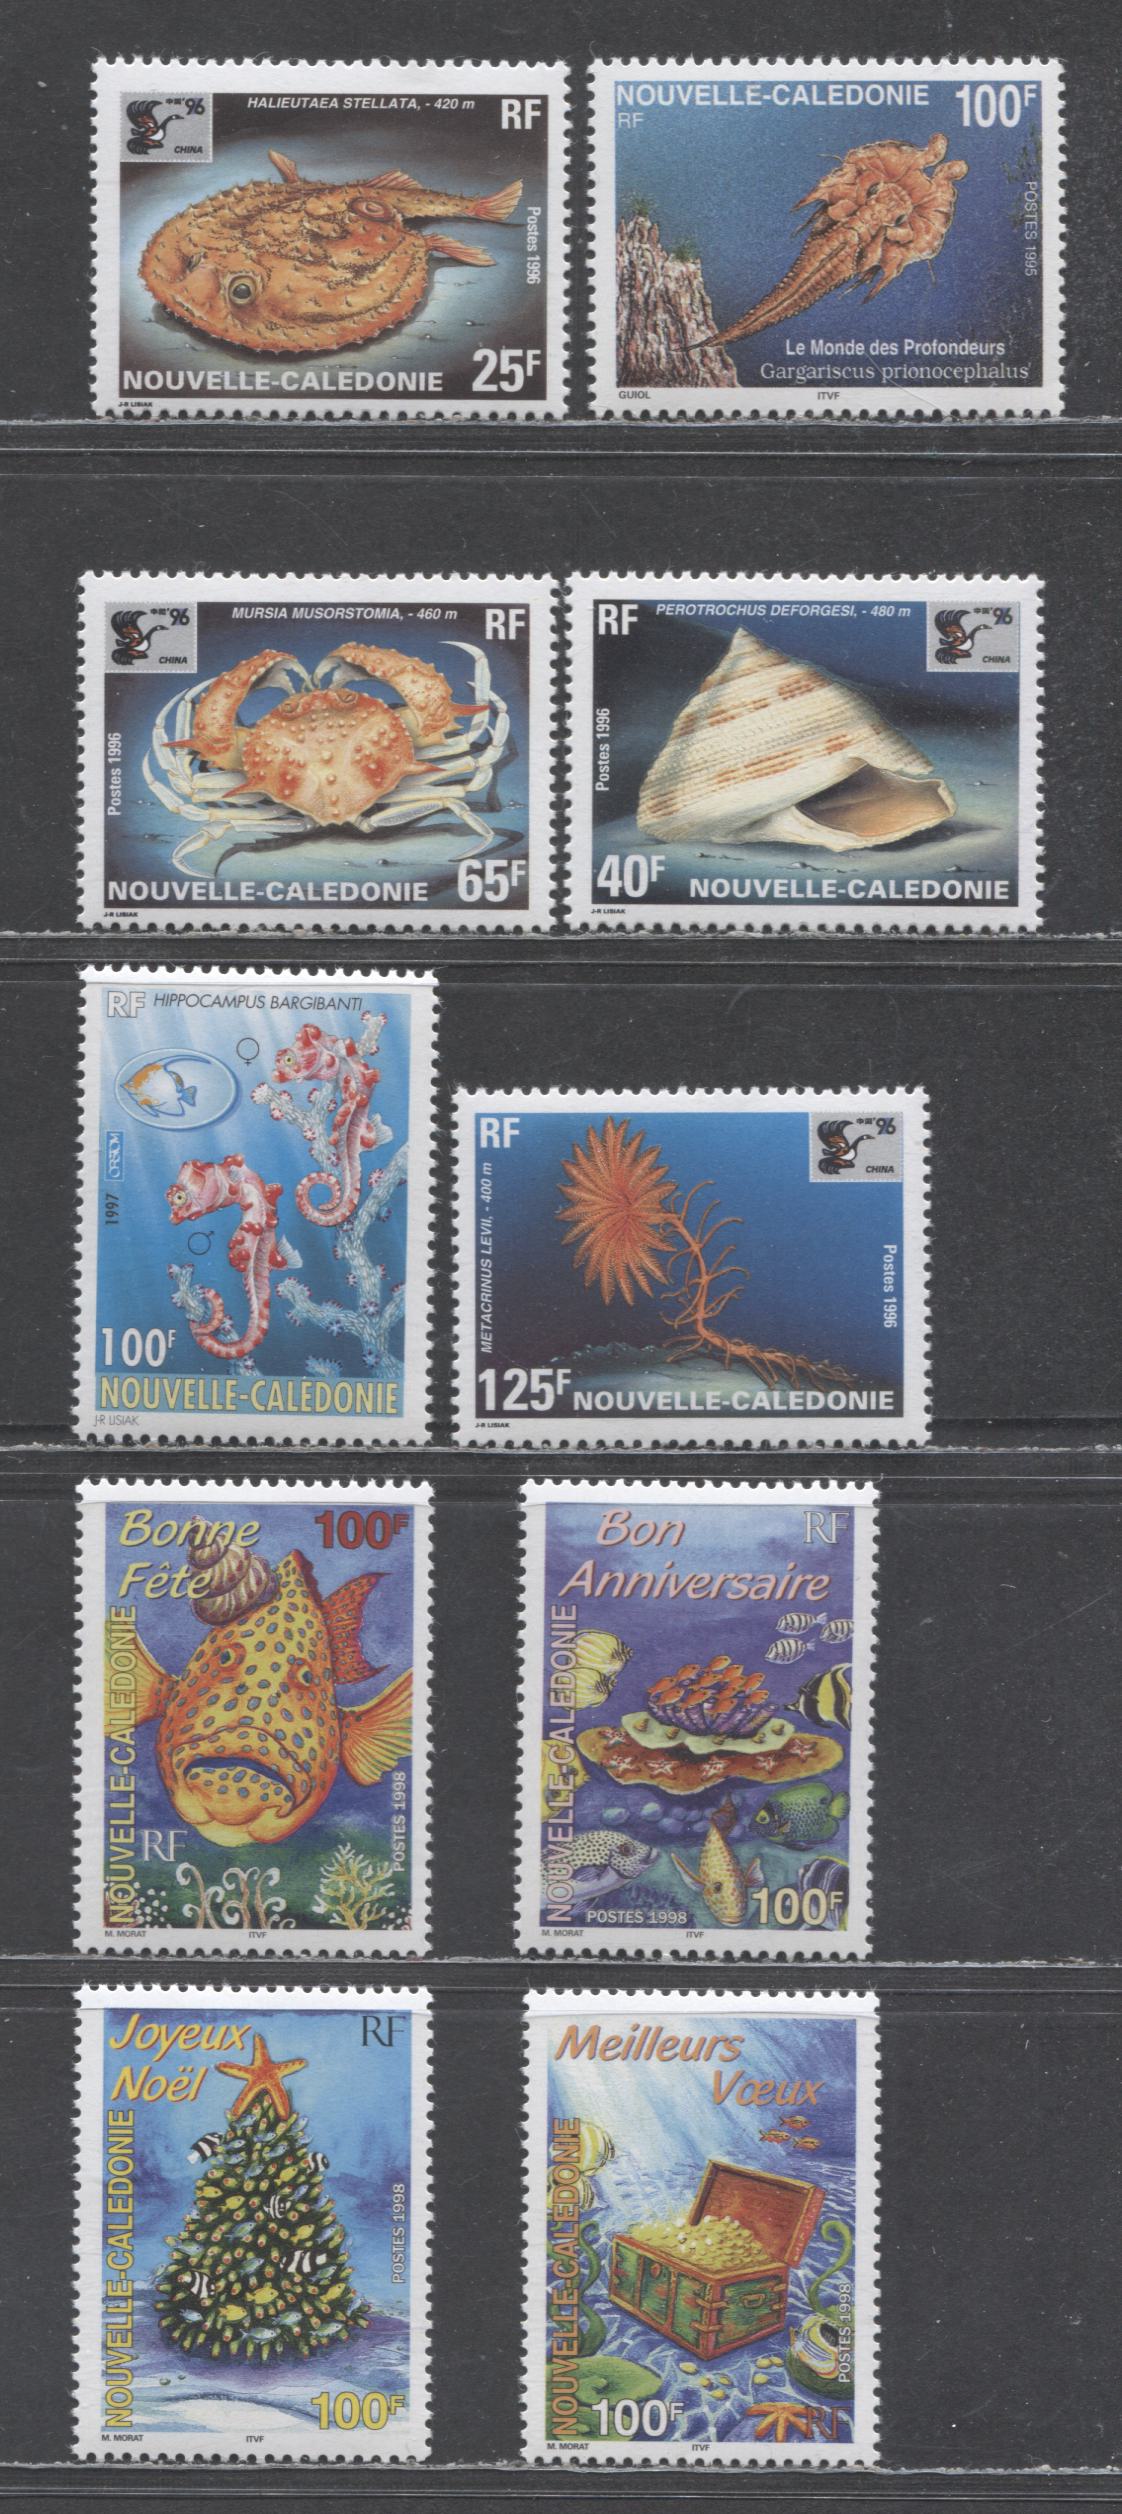 Lot 124 New Caledonia SC#731/811 1995-1998 Marine Life - Underwater Scenes Issues, 10 VFNH Singles, Click on Listing to See ALL Pictures, 2017 Scott Cat. $21.65